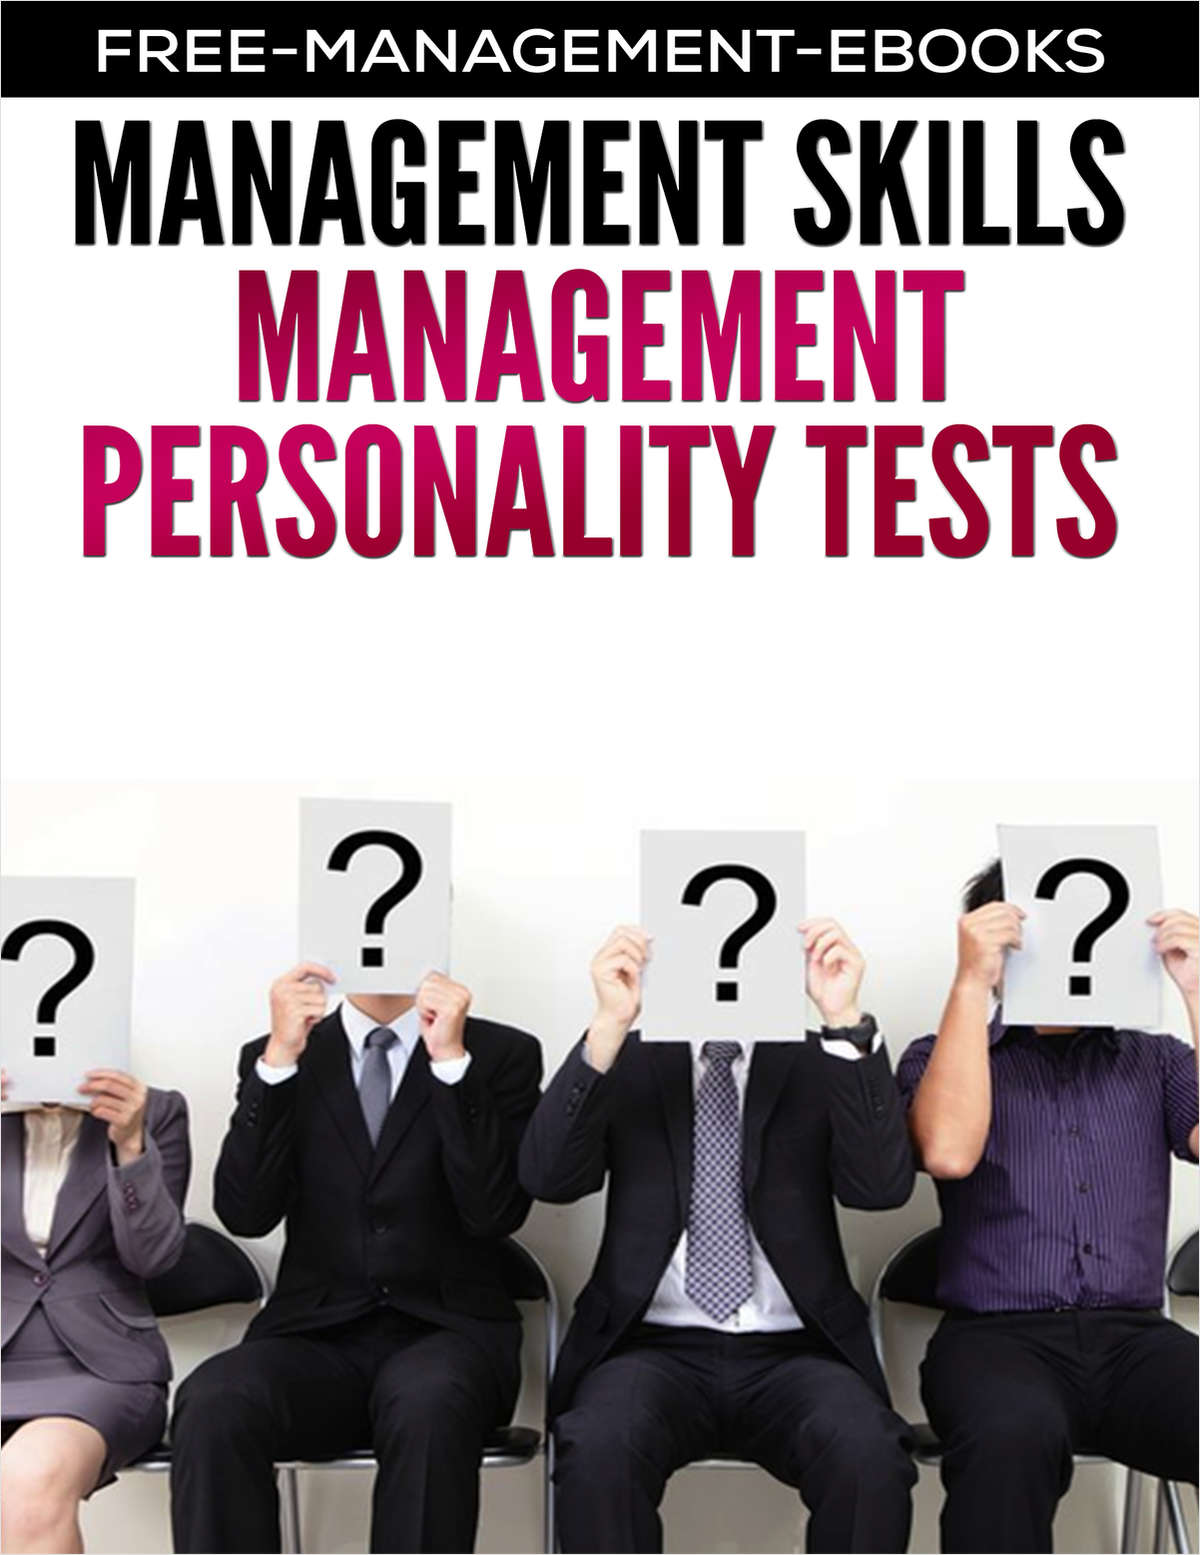 Preparing for Management Personality Tests - Developing Your Management Skills